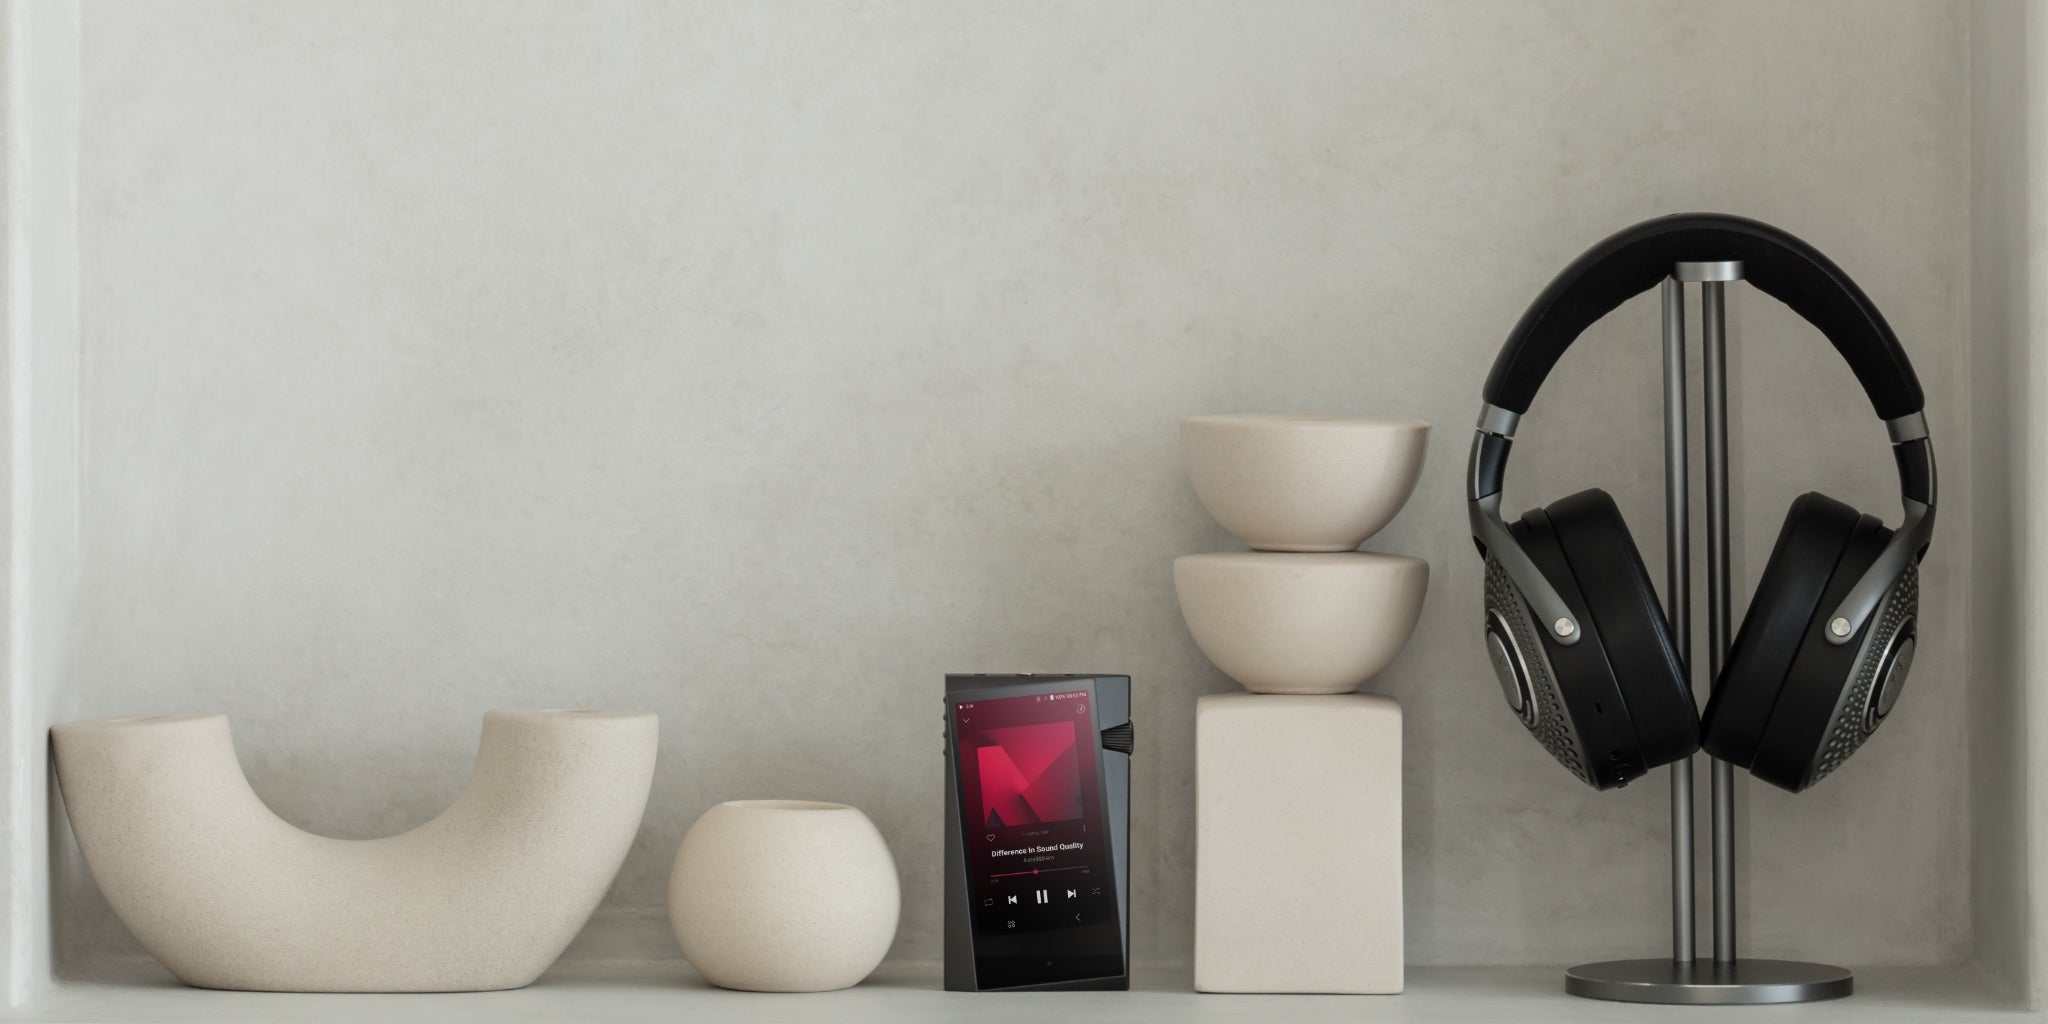 Astell&Kern SR35 with Focal headphones and ceramic decor